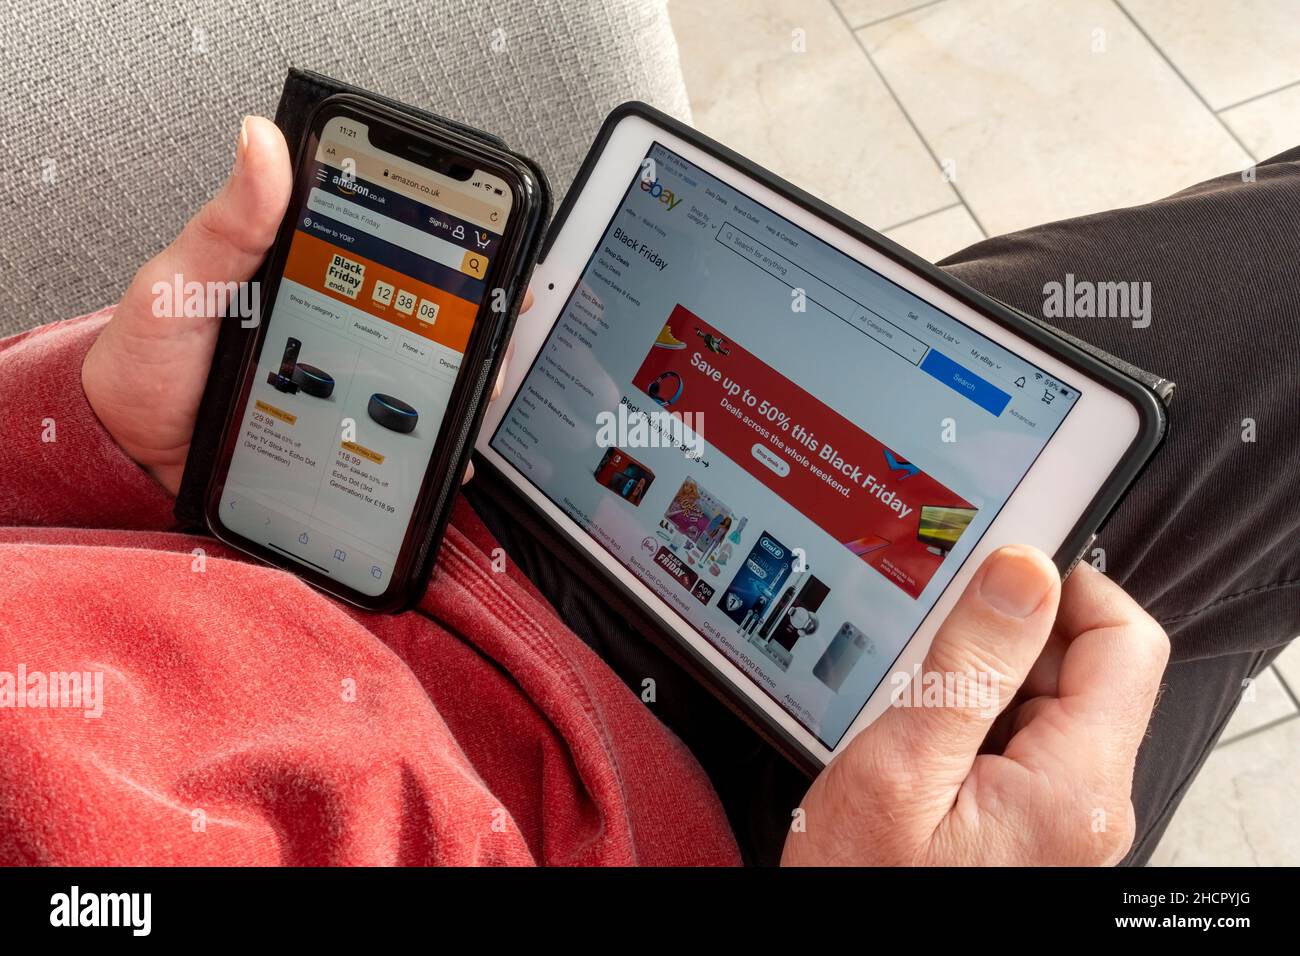 Close up of man browsing and ordering goods on Black Friday website on iphone and ipad tablet England UK United Kingdom GB Great Britain Stock Photo